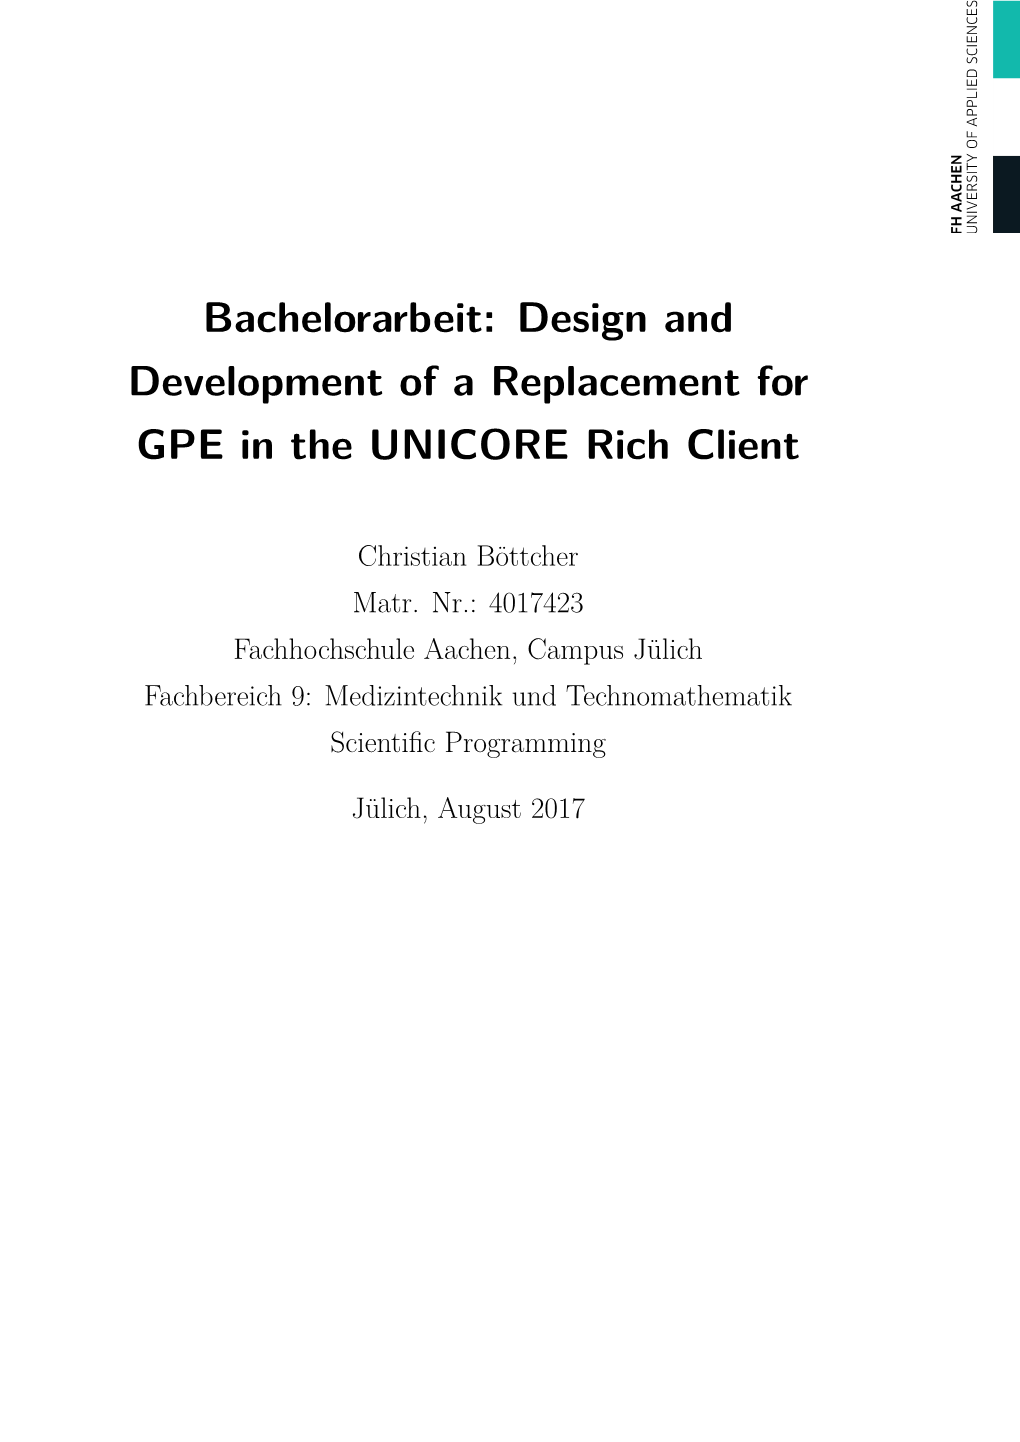 Bachelorarbeit: Design and Development of a Replacement for GPE in the UNICORE Rich Client